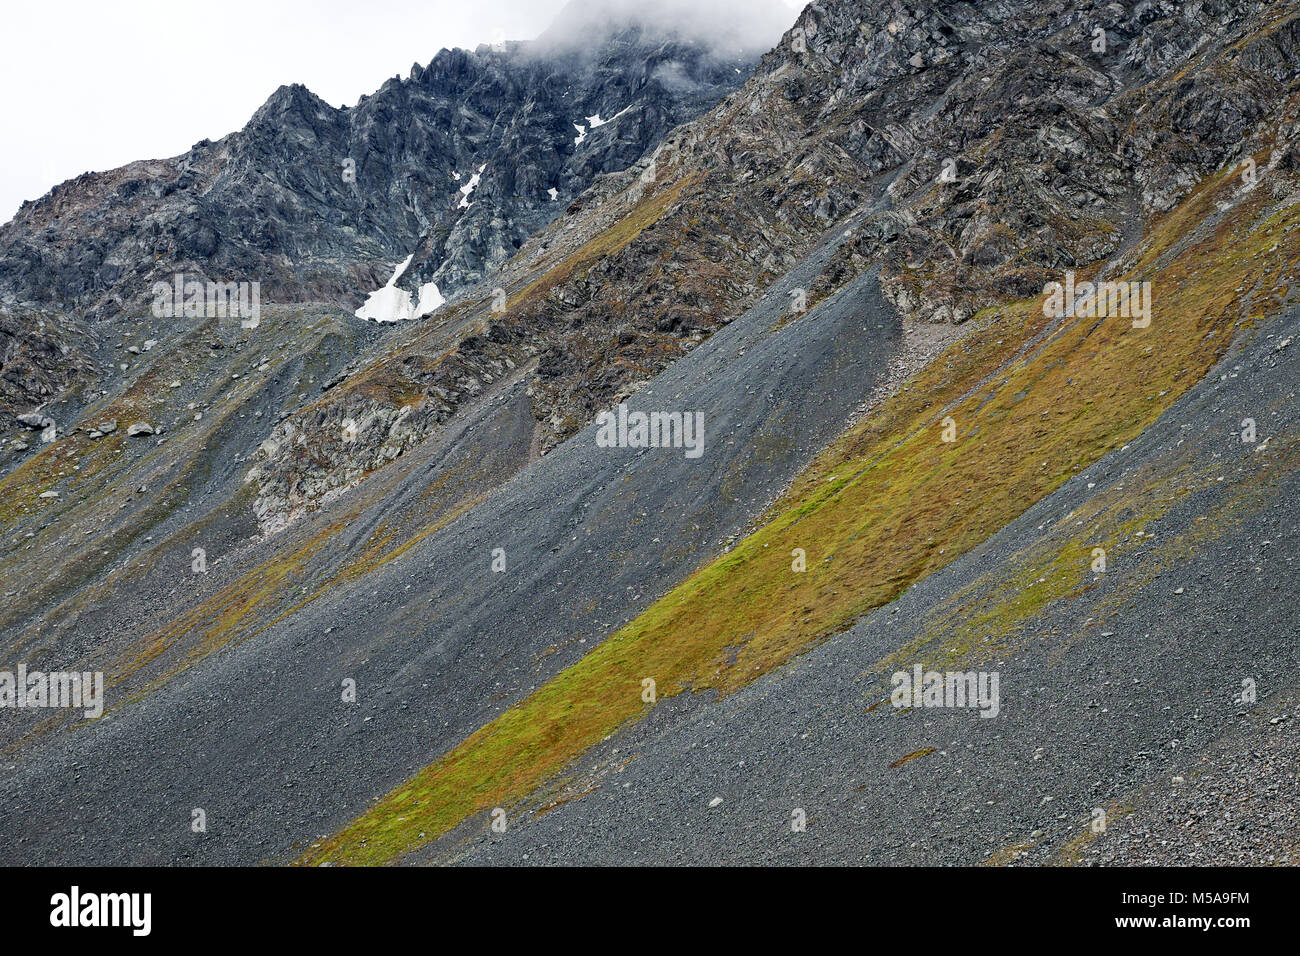 FROST ACTION ON THE ROCKY MOUNTAIN SLOPES HAS CREATED THESE CLASIC SCREES Stock Photo